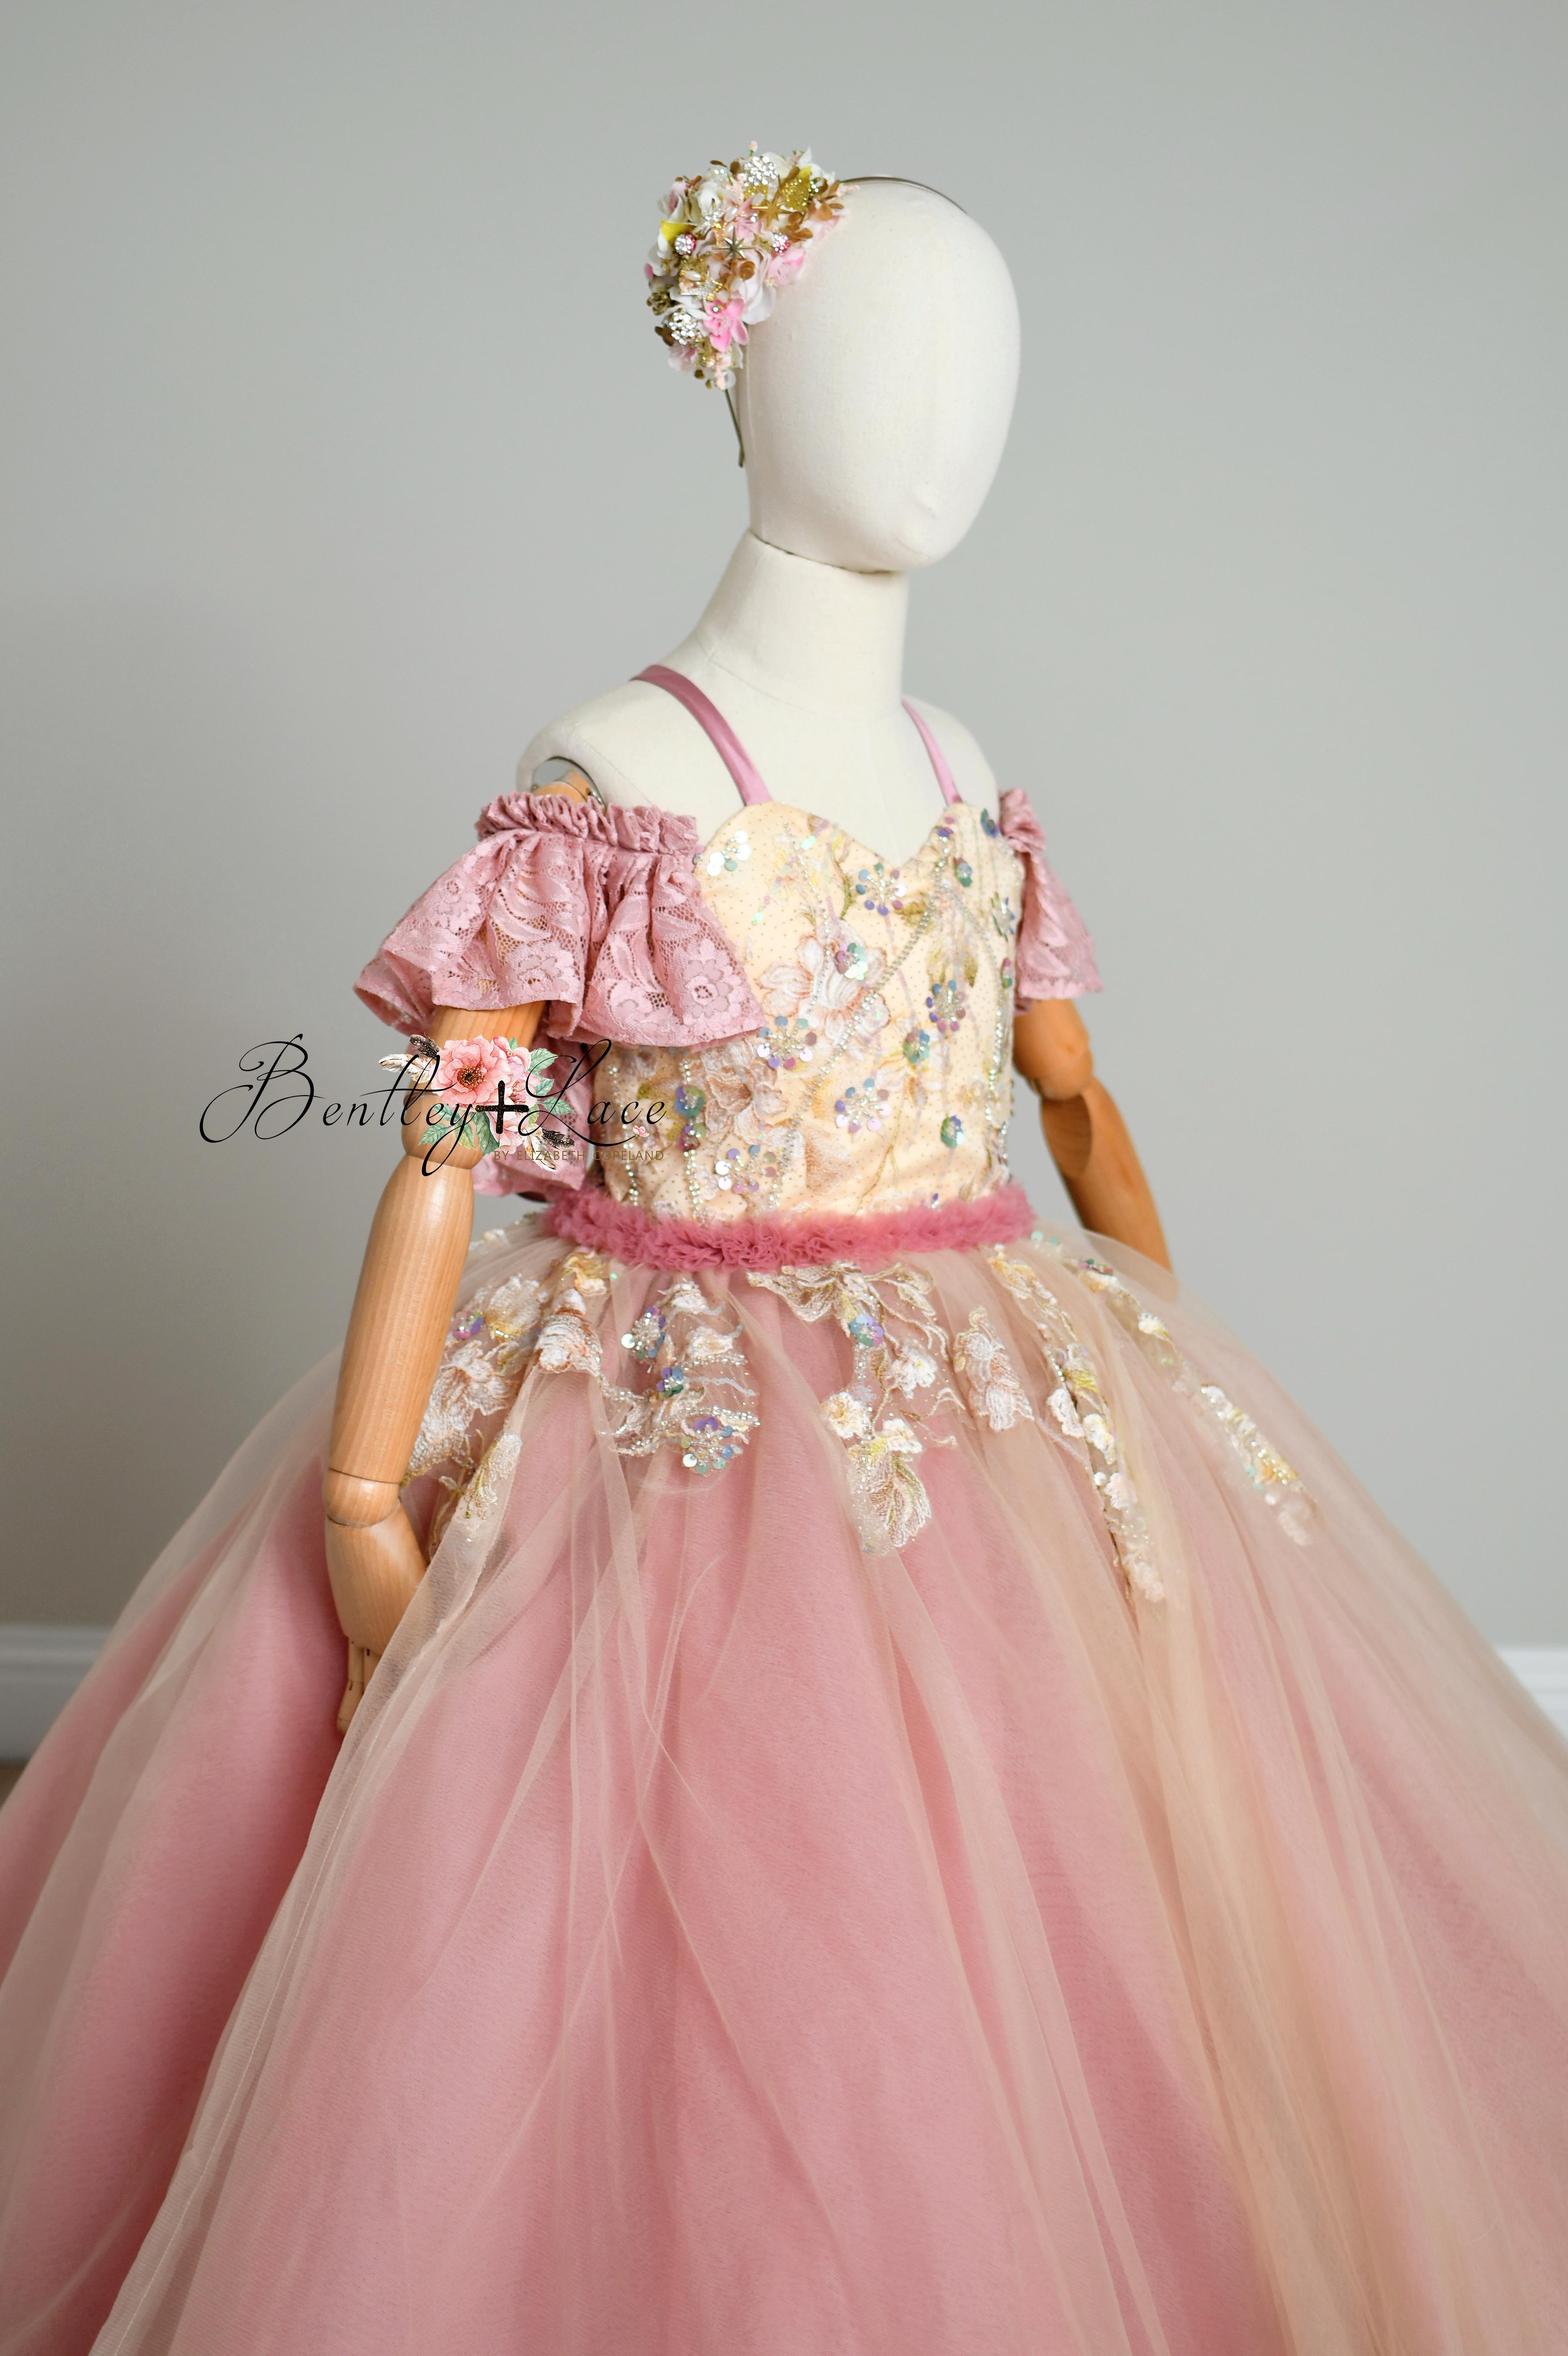 "Sunshine Serenade" Couture Floor length gown (6 Year - Petite 8 Year)